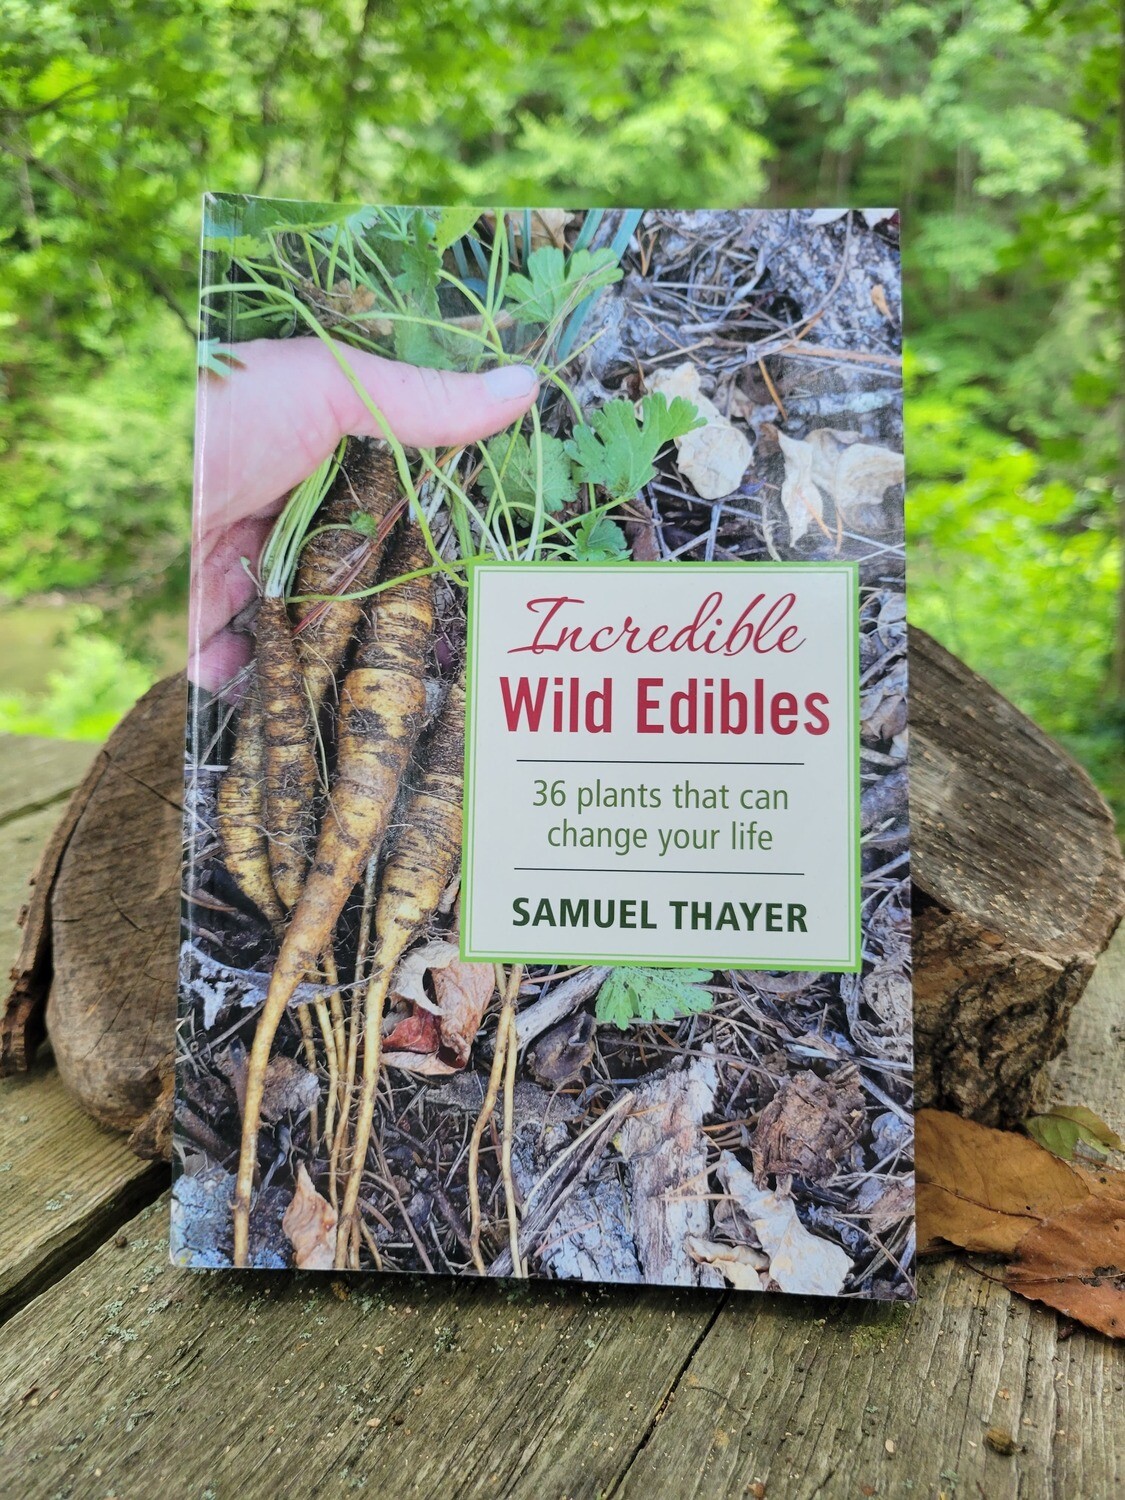 Incredible Wild Edibles: 36 plants that can change your life by Samuel Thayer